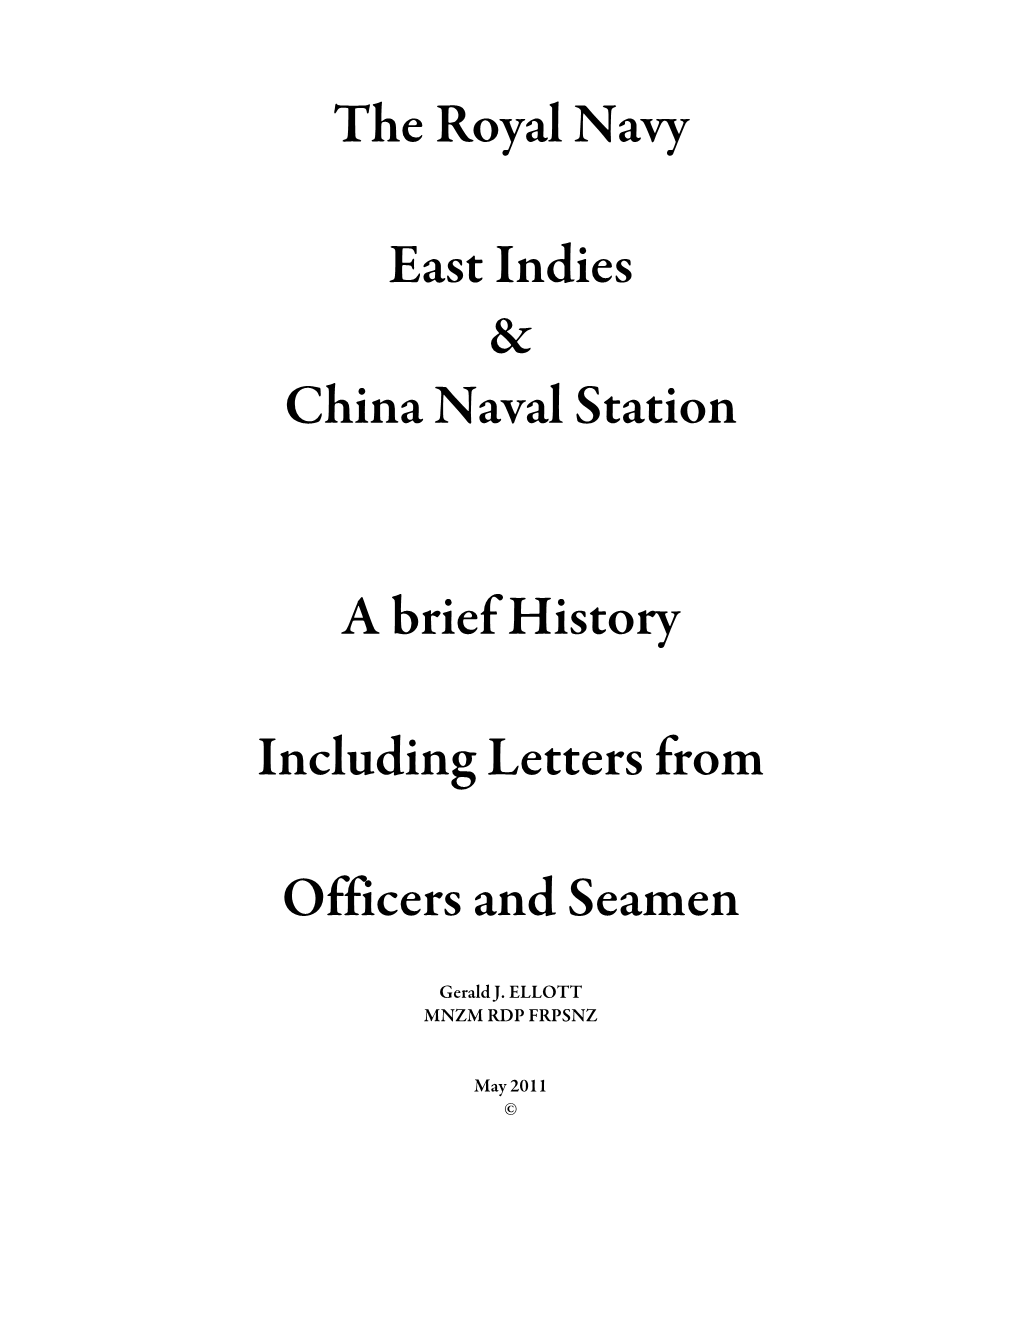 The Royal Navy East Indies & China Naval Station a Brief History